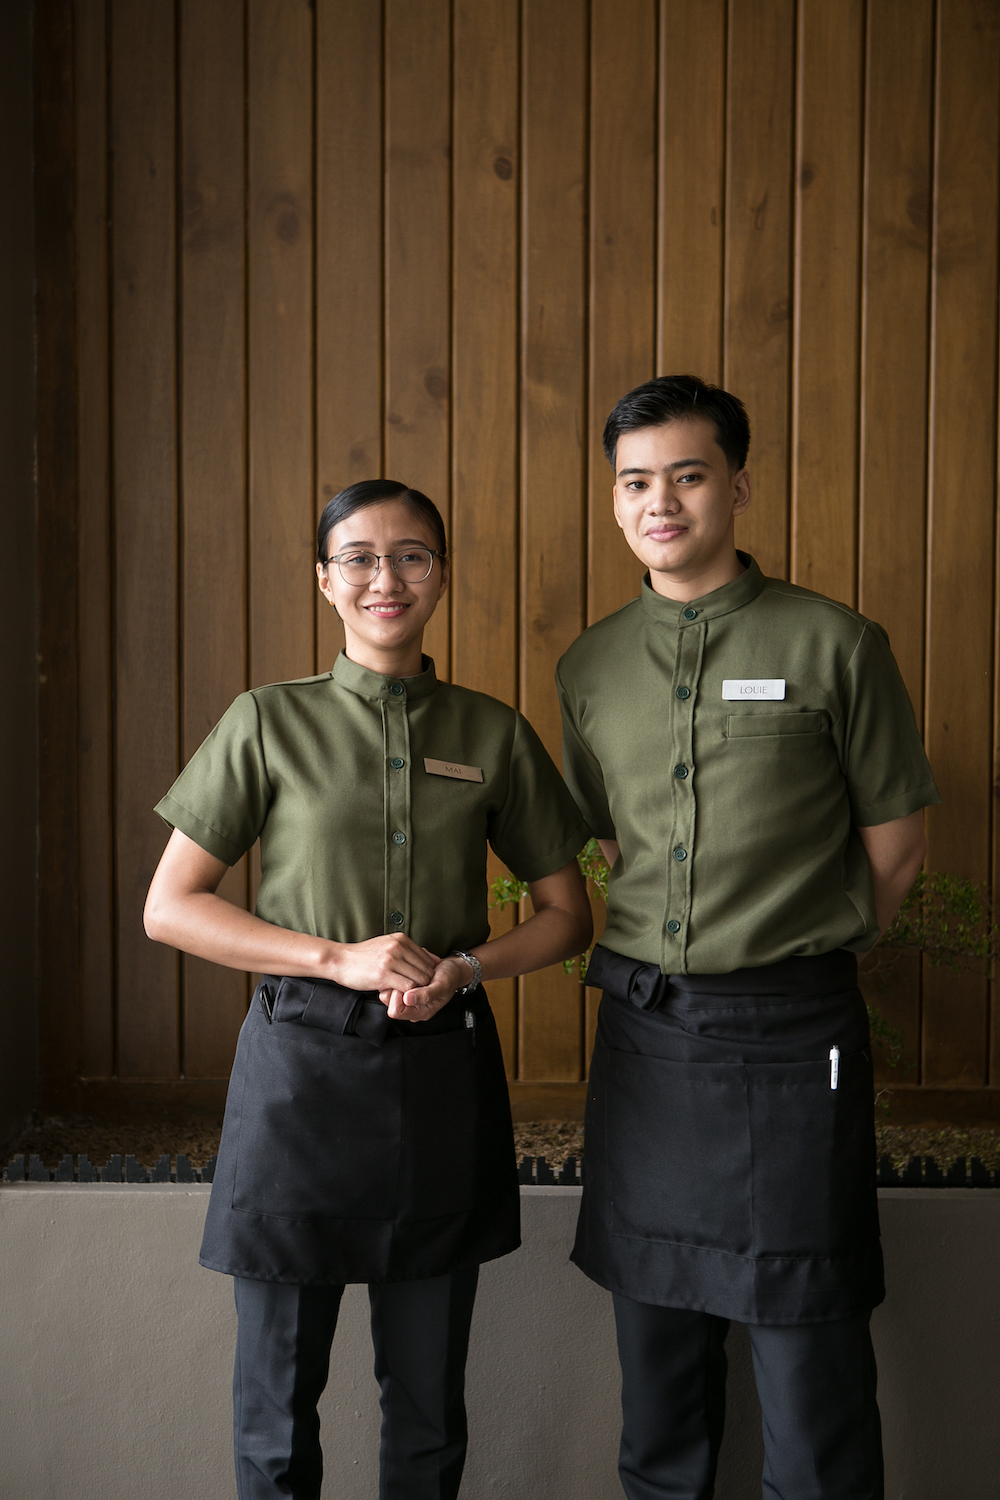 The chic uniforms and the spirit of omotenashi harmonize with the overall design and appeal of Yūgen Japanese Restaurant